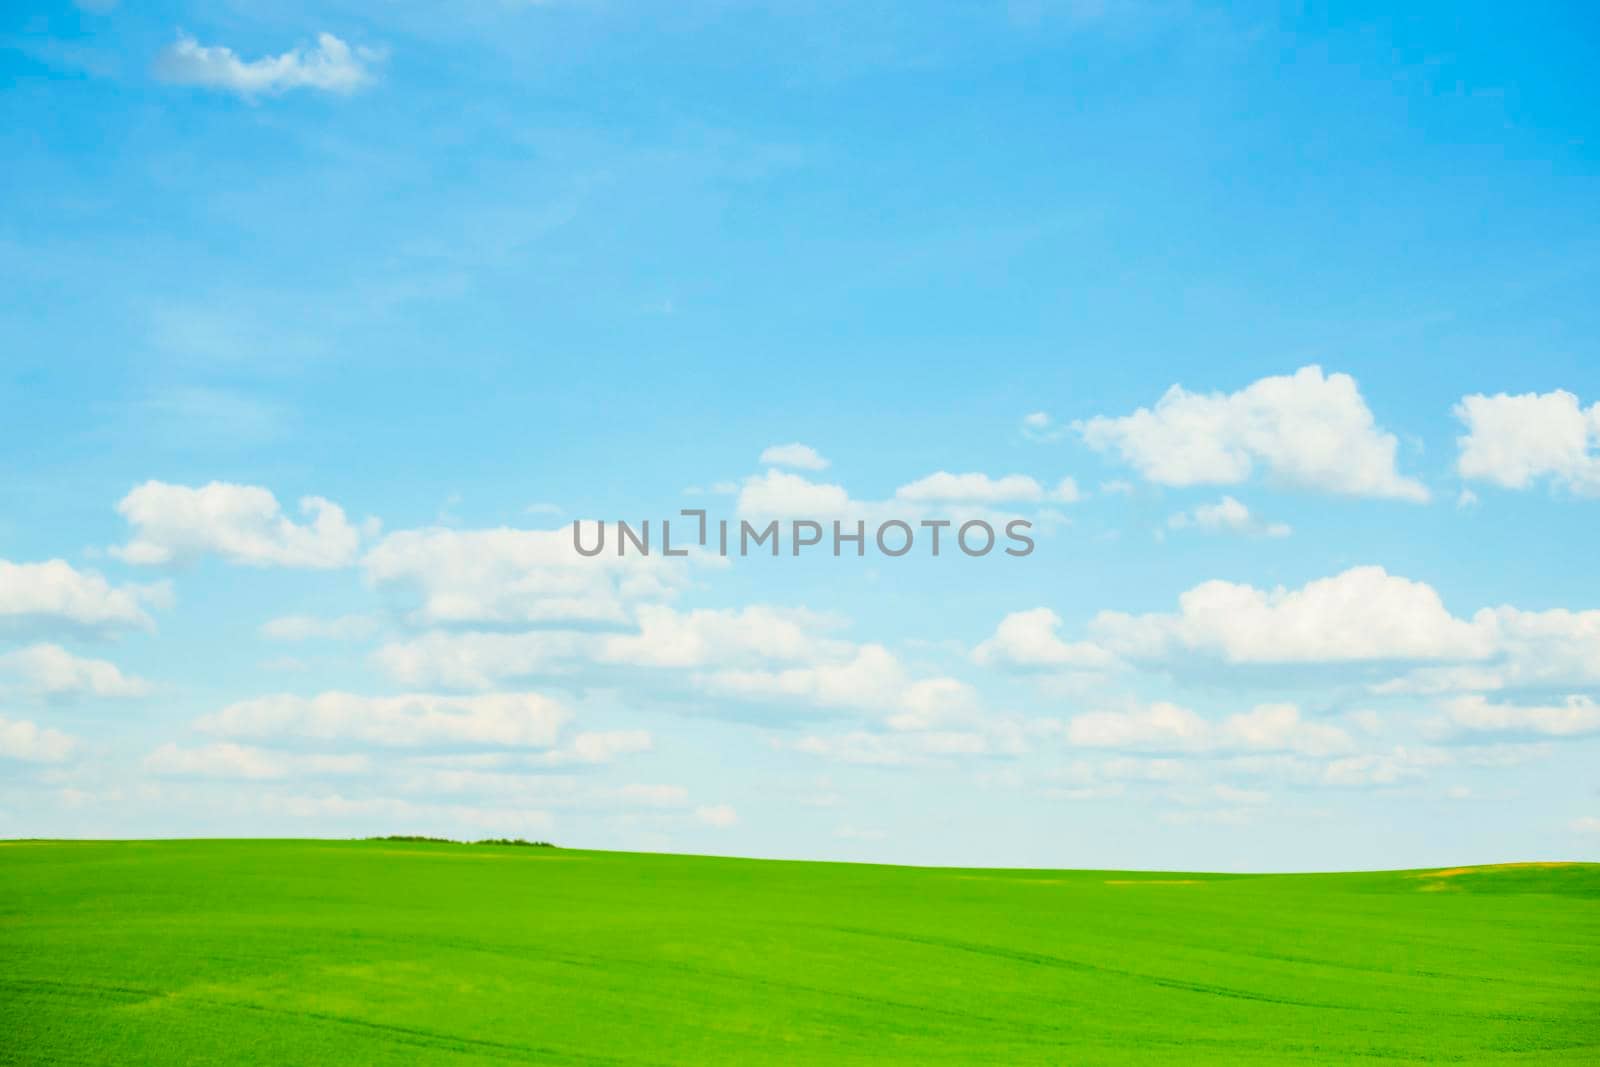 Clouds in a crystal clear, cool-blue sky, an meadow stretches out across a seemingly endless landscape of gentle hills. The grass is lush and vibrantly colored in several striking shades of green.